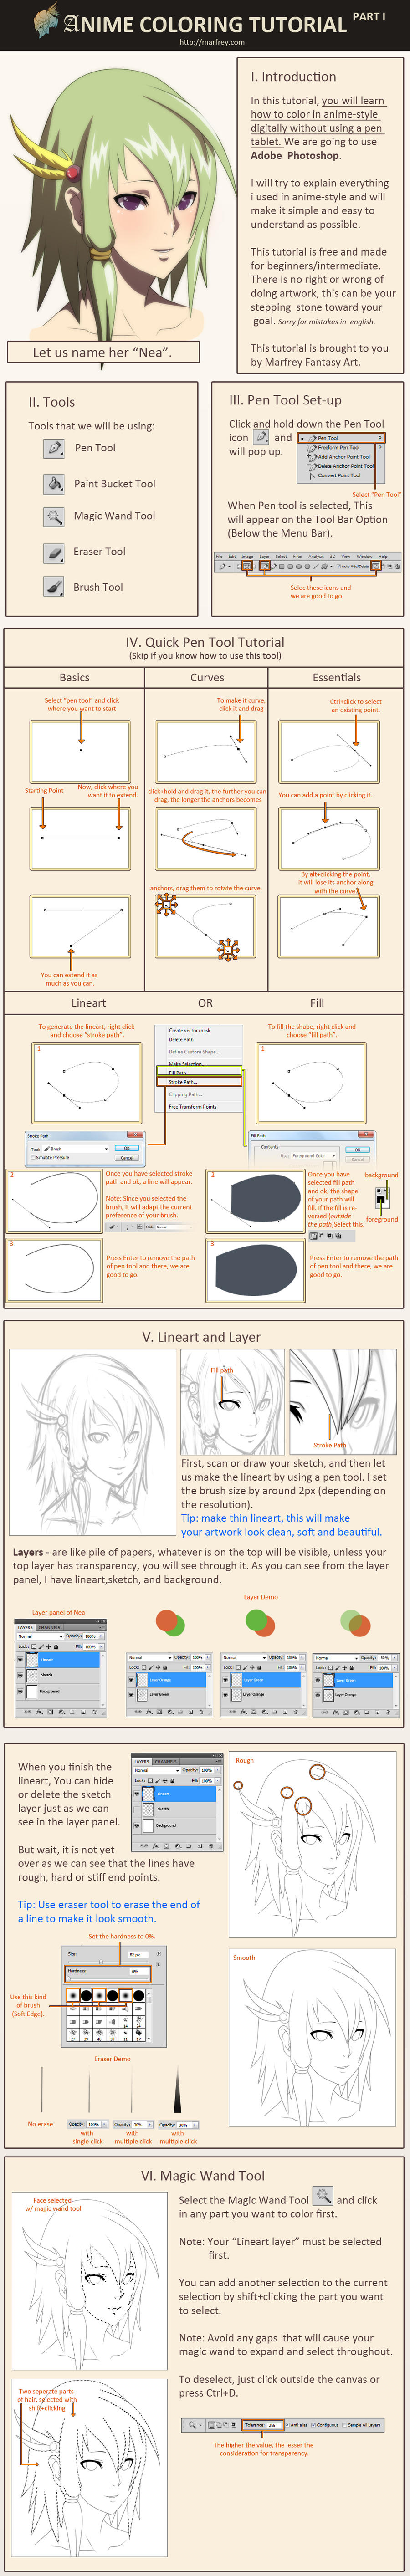 Anime Coloring Tutorial Part 1